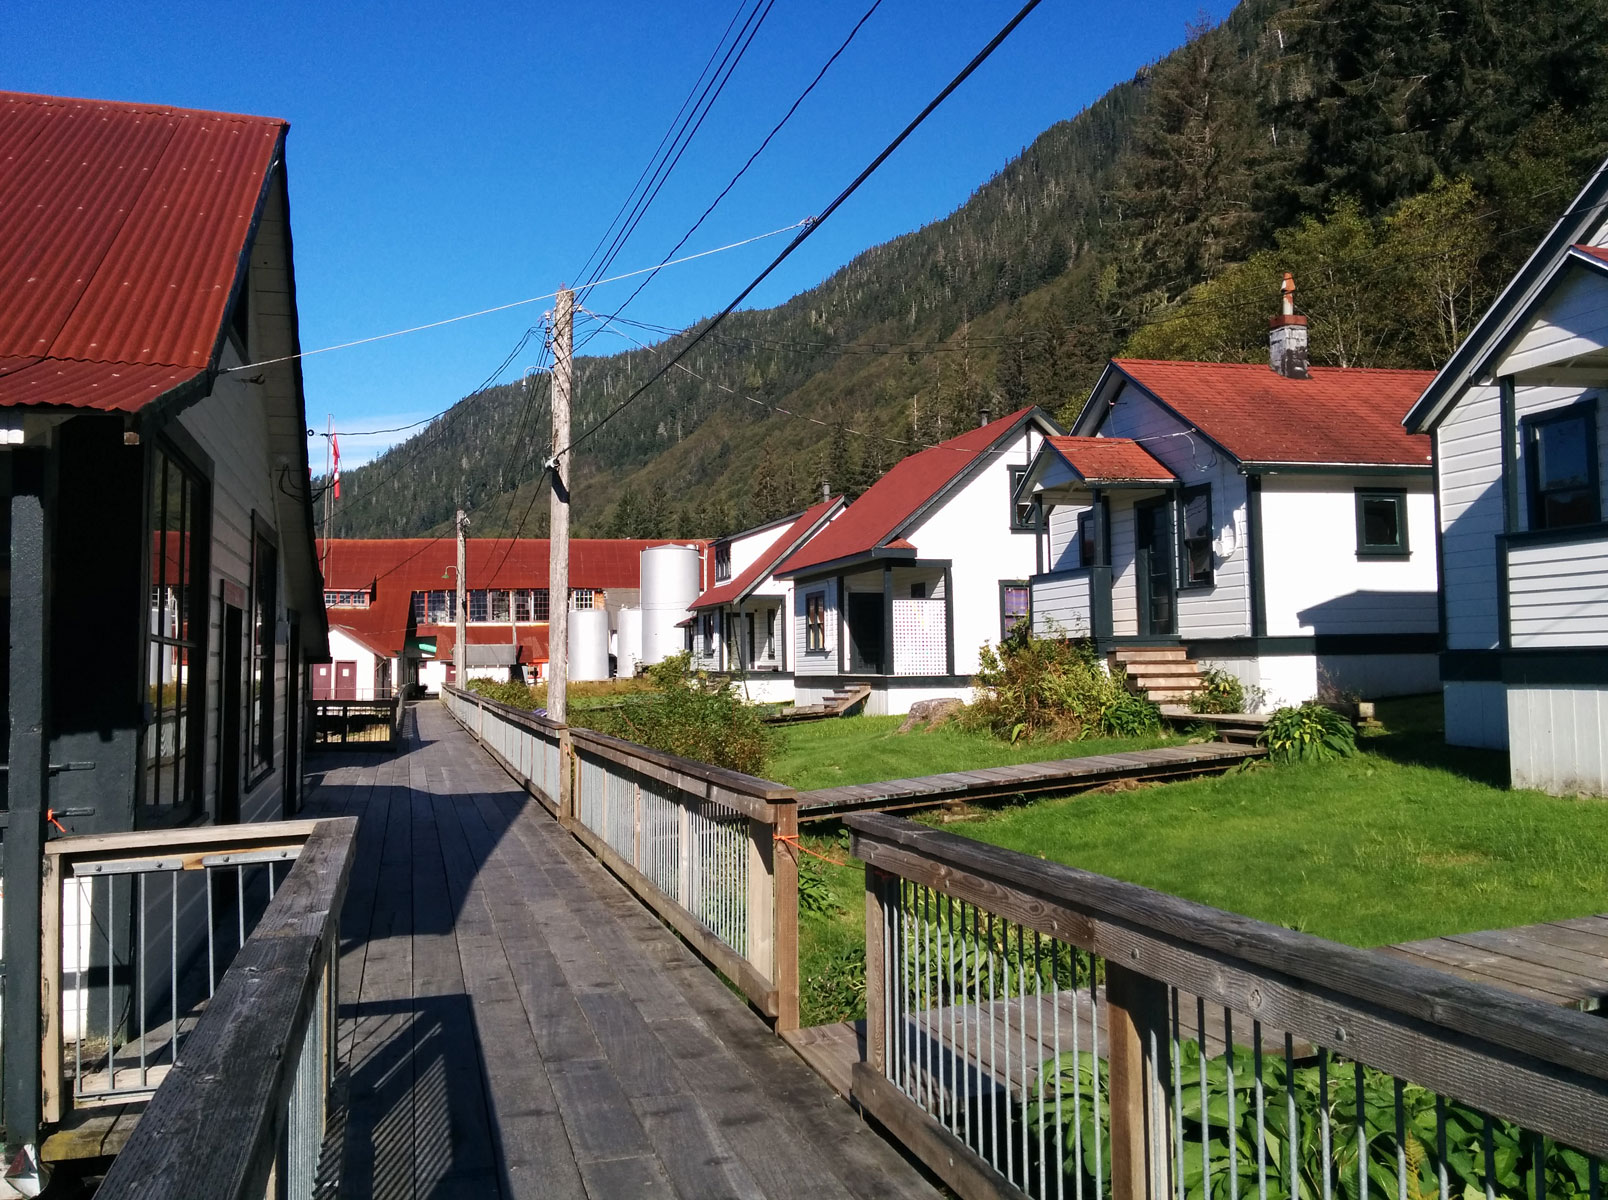 Boardwalk and row of small cannery housing buildings.